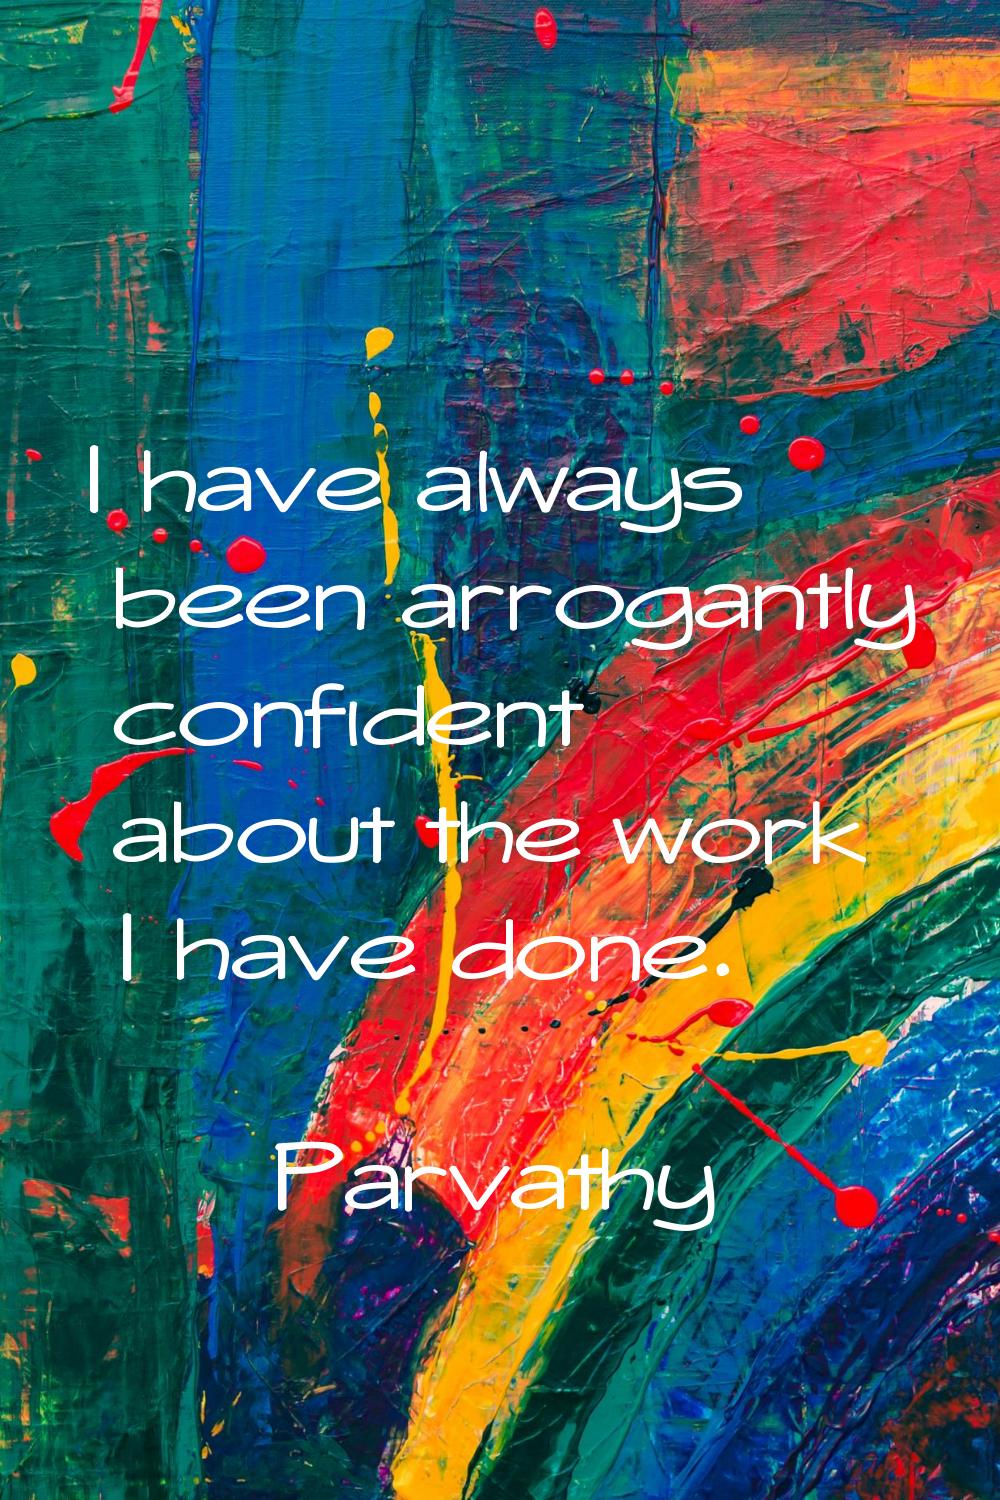 I have always been arrogantly confident about the work I have done.